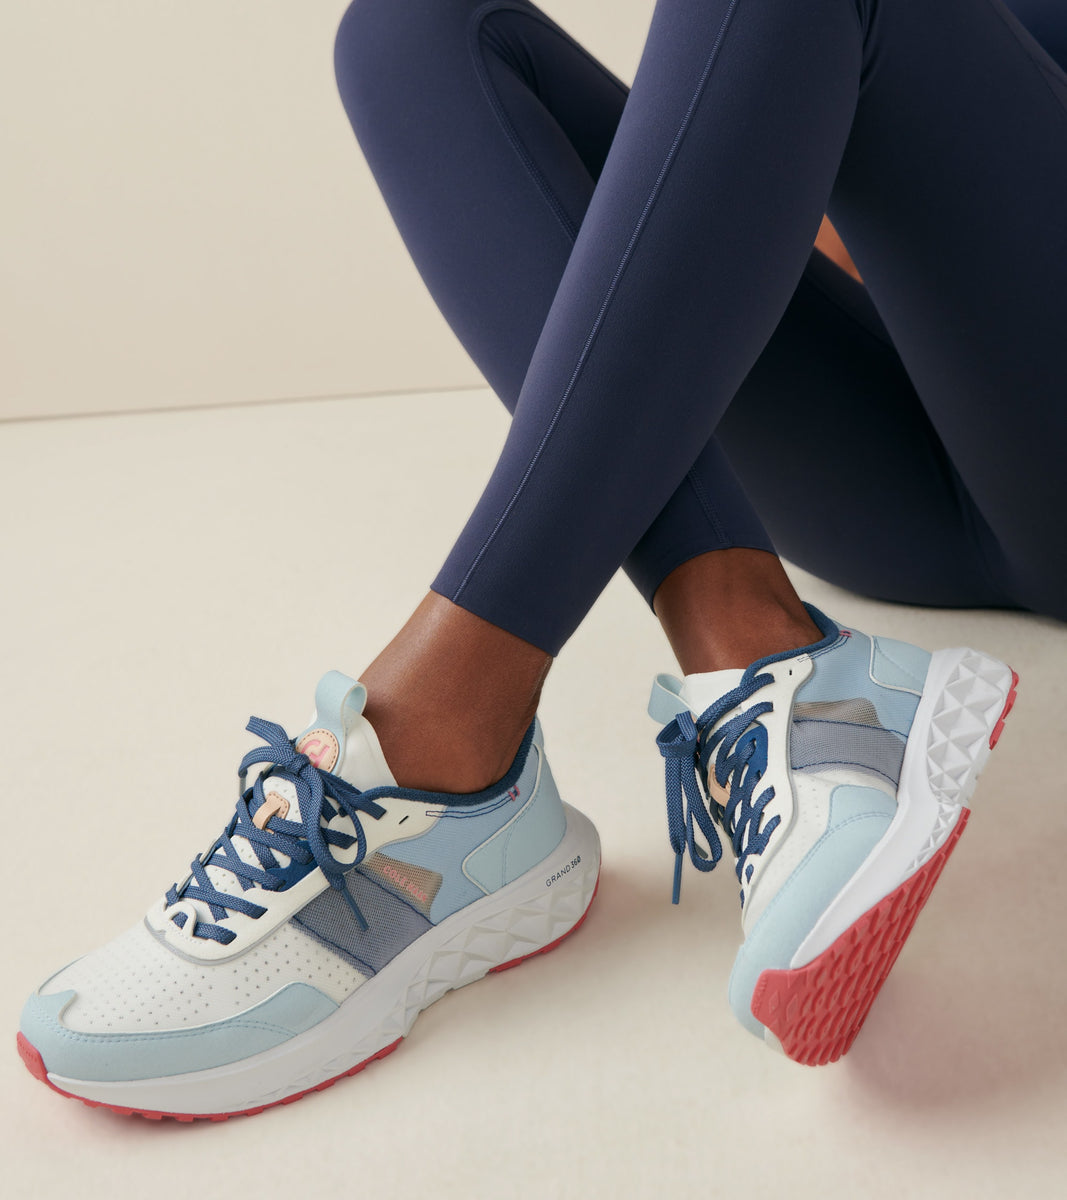 W28126:OXFORD BLUE/ENSIGN BLUE/OPTIC WHITE Tenis Mujer Women's ZERØGRAND Outpace 3 | Cole Haan Colombia